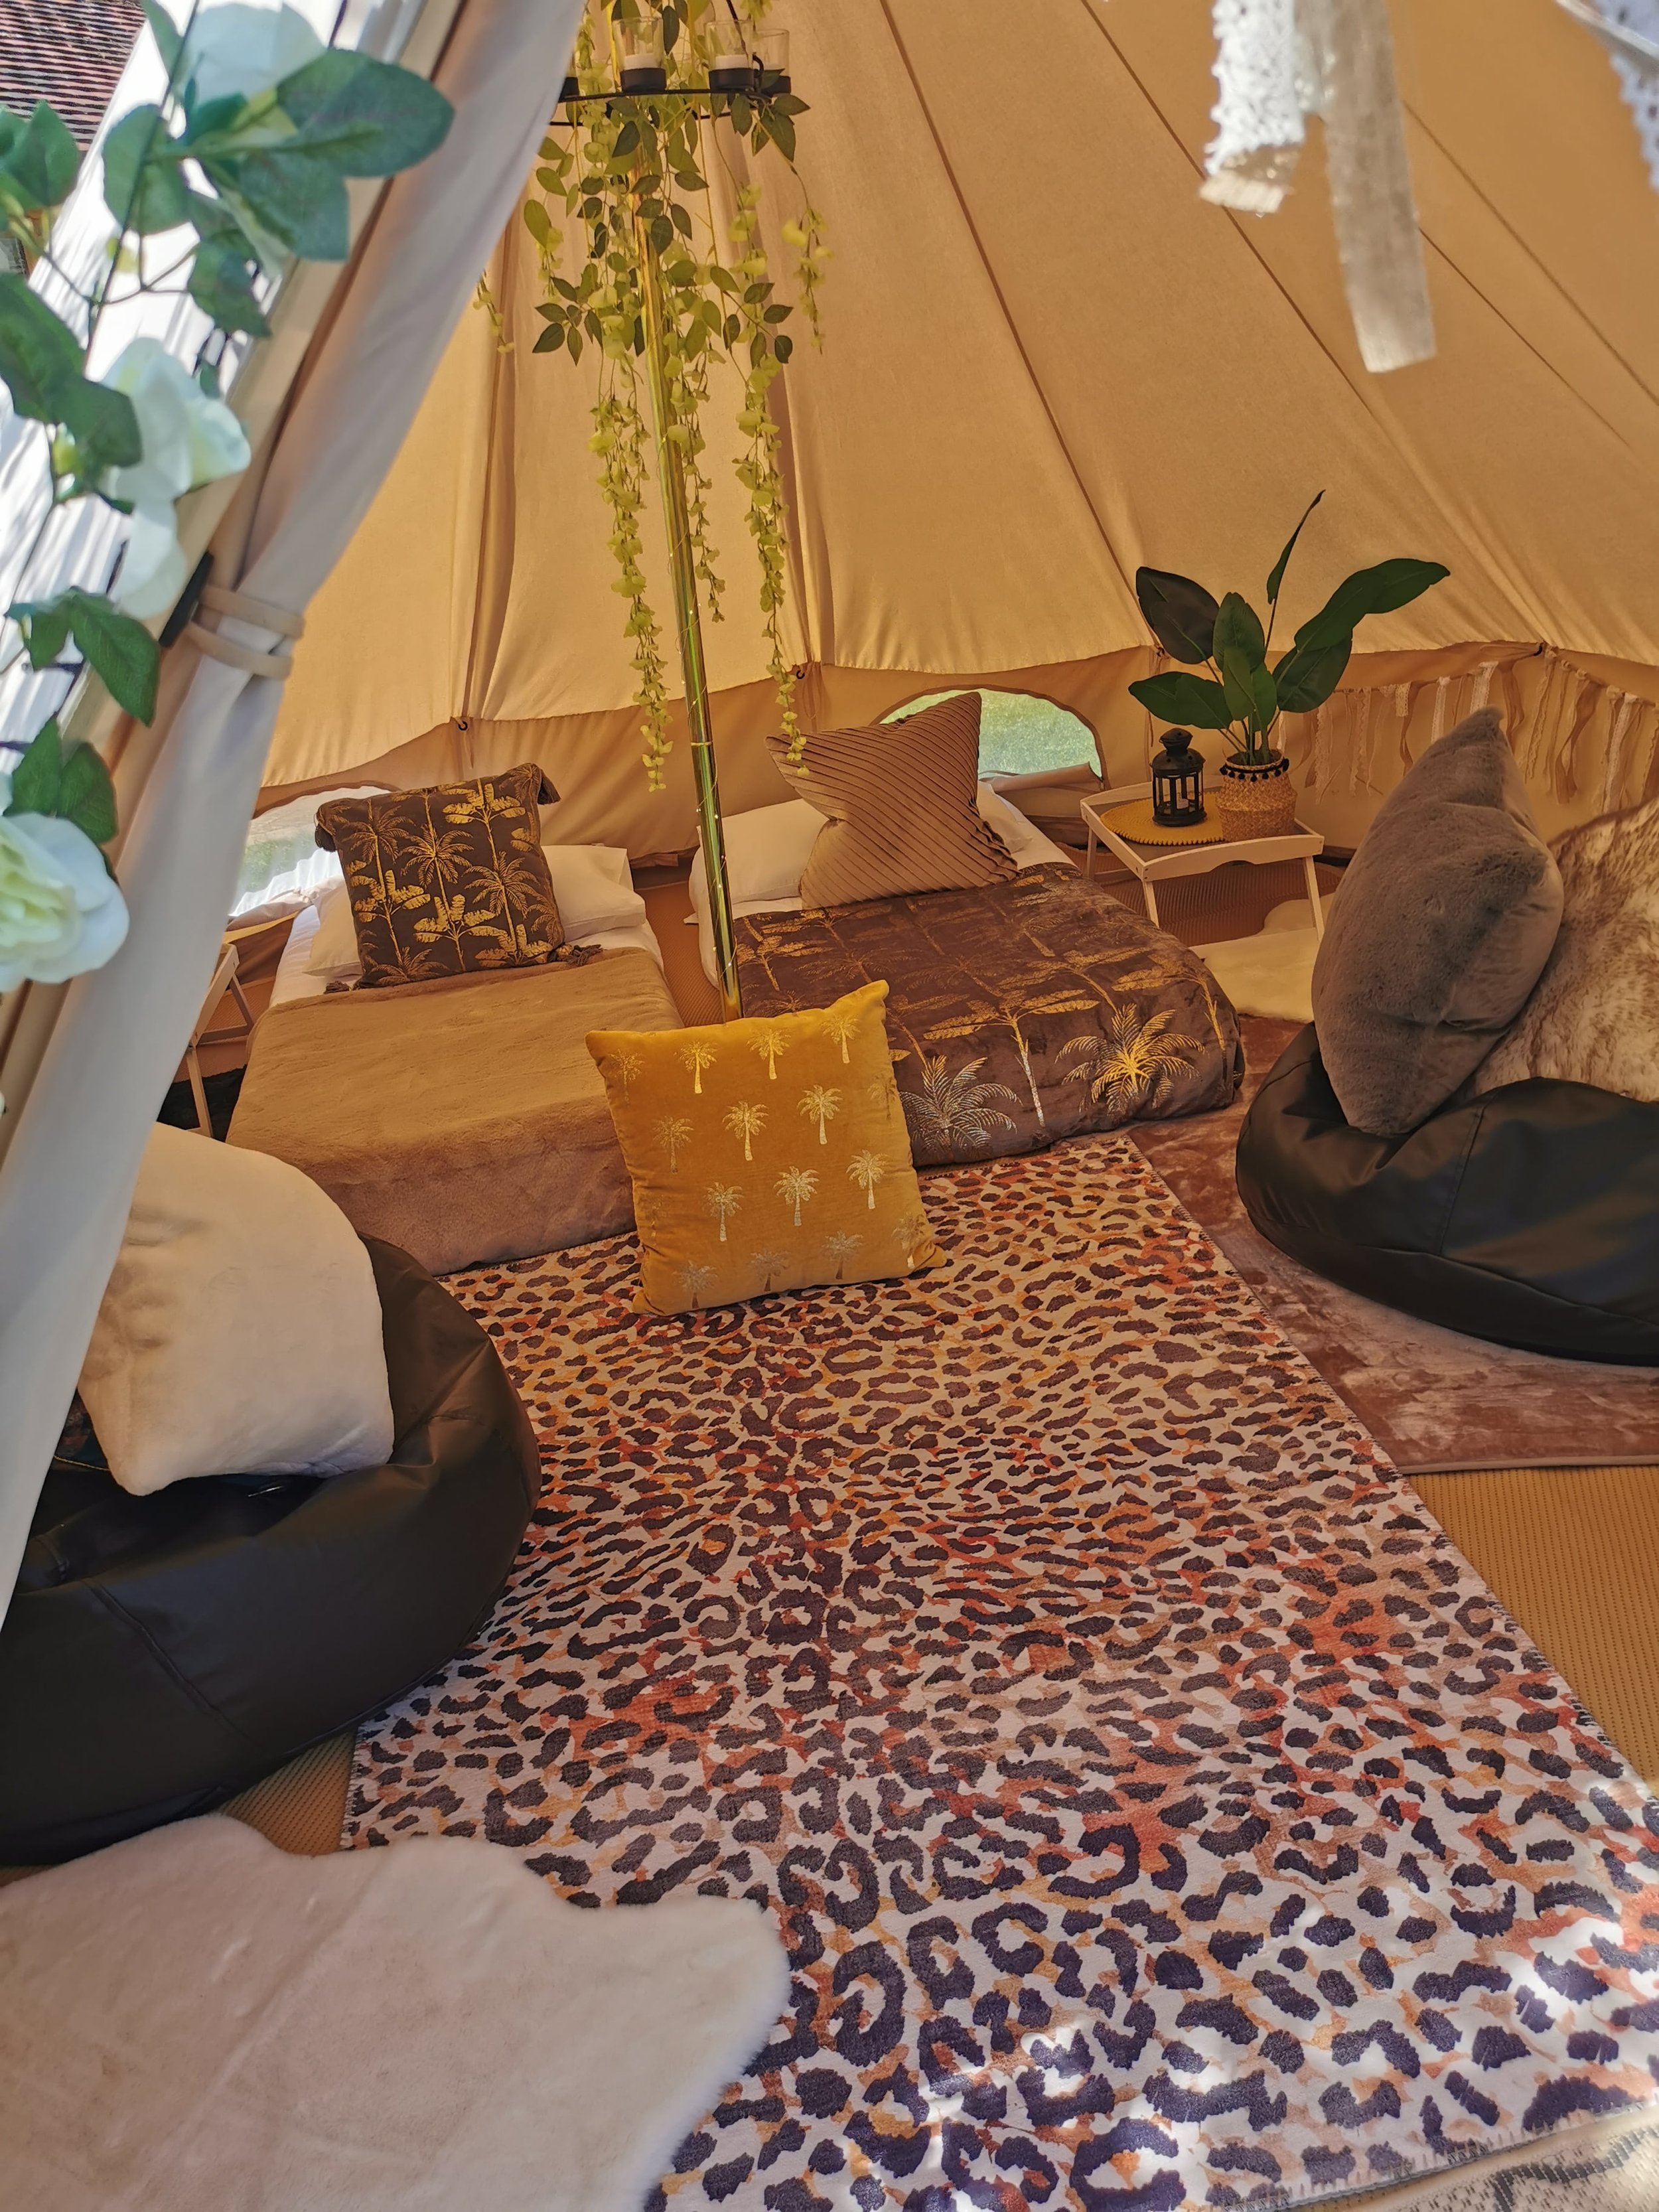 Glampees - Sleepover Party Tents in Berkshire